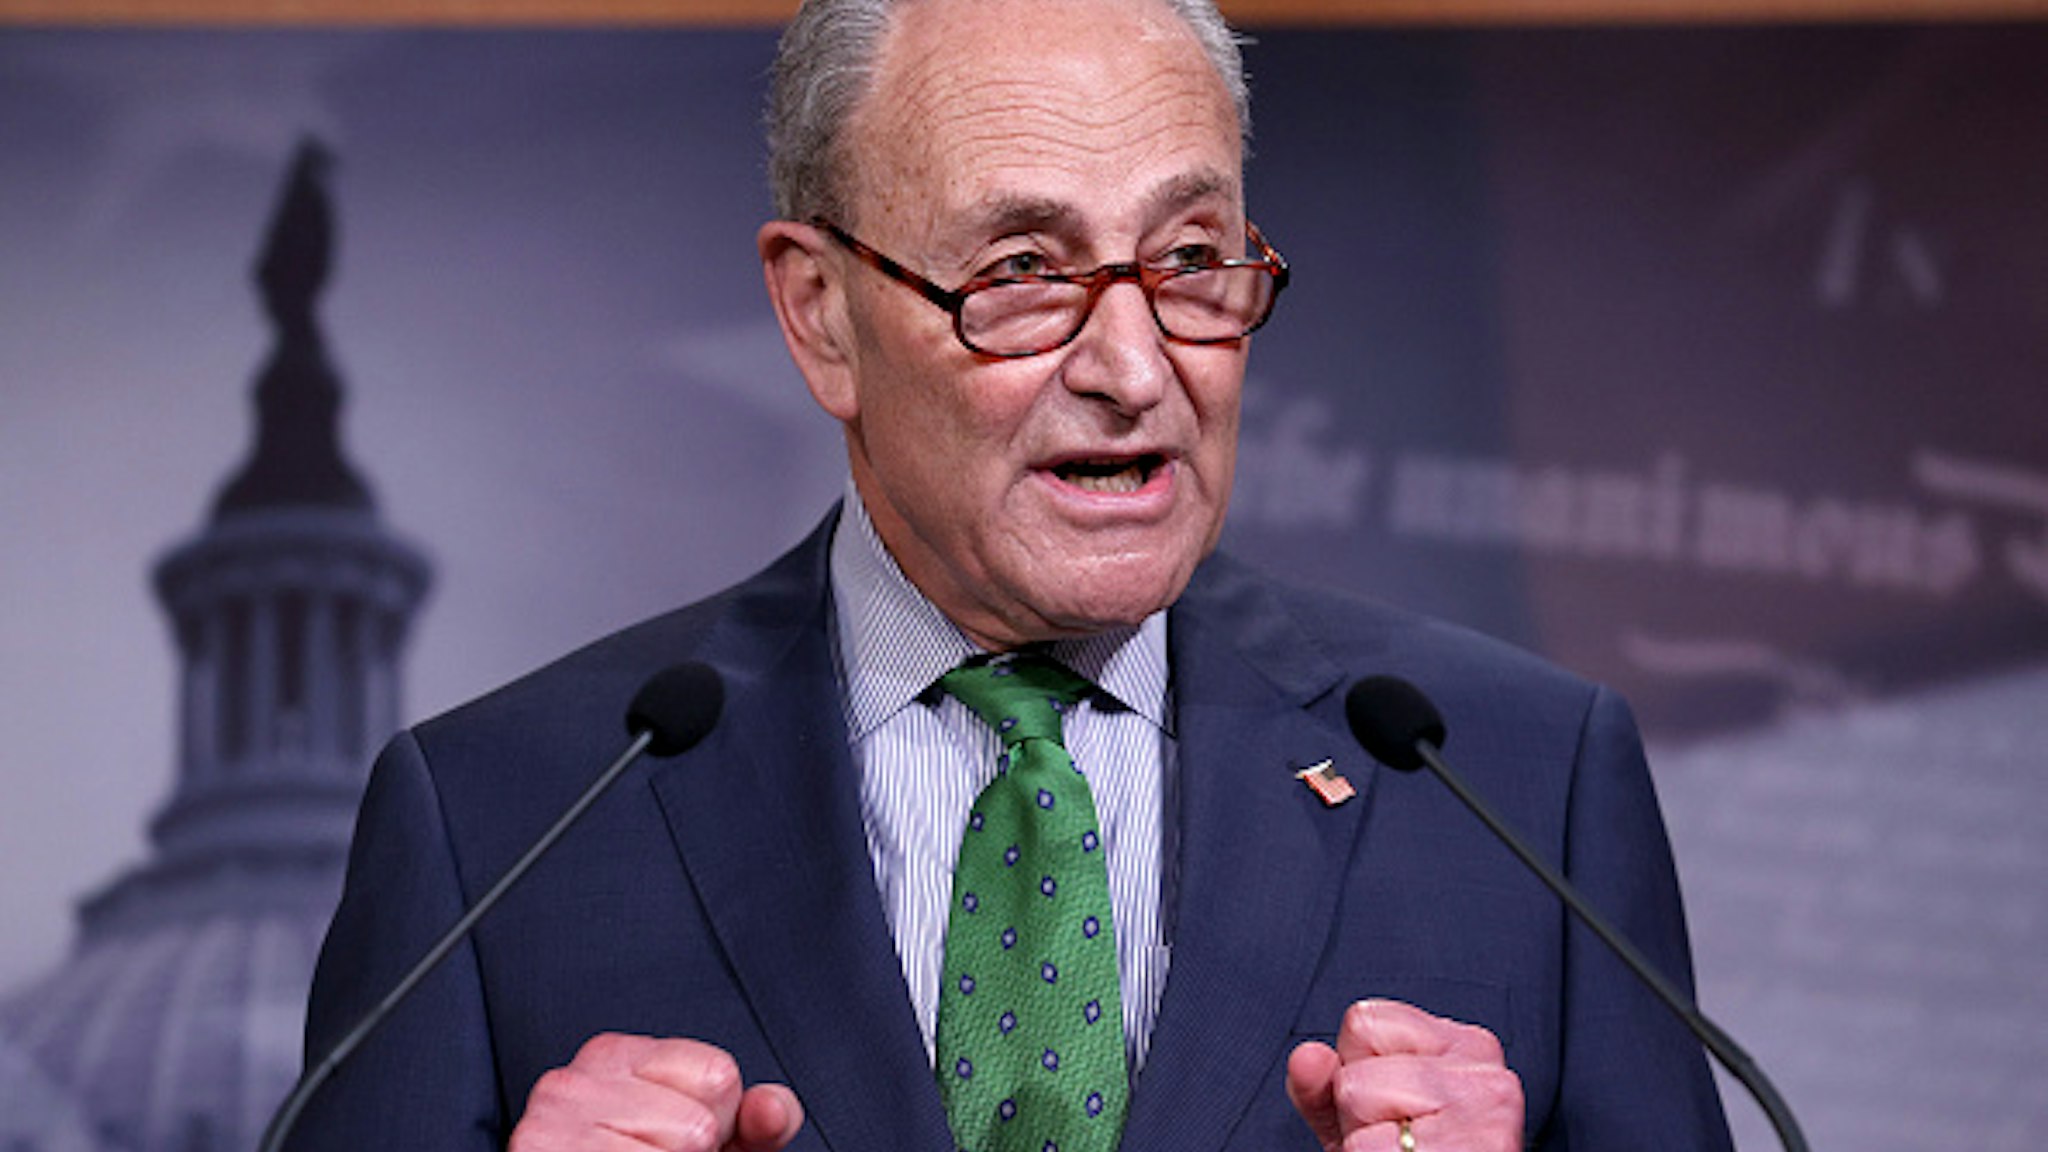 WASHINGTON, DC - JUNE 09: Senate Minority Leader Chuck Schumer (D-NY) speaks at a press conference June 09, 2020 in Washington, DC. Schumer and Sen. Mazie Hirono (D-HI) answered questions related to reforming law enforcement policies in the wake of the death of George Floyd.